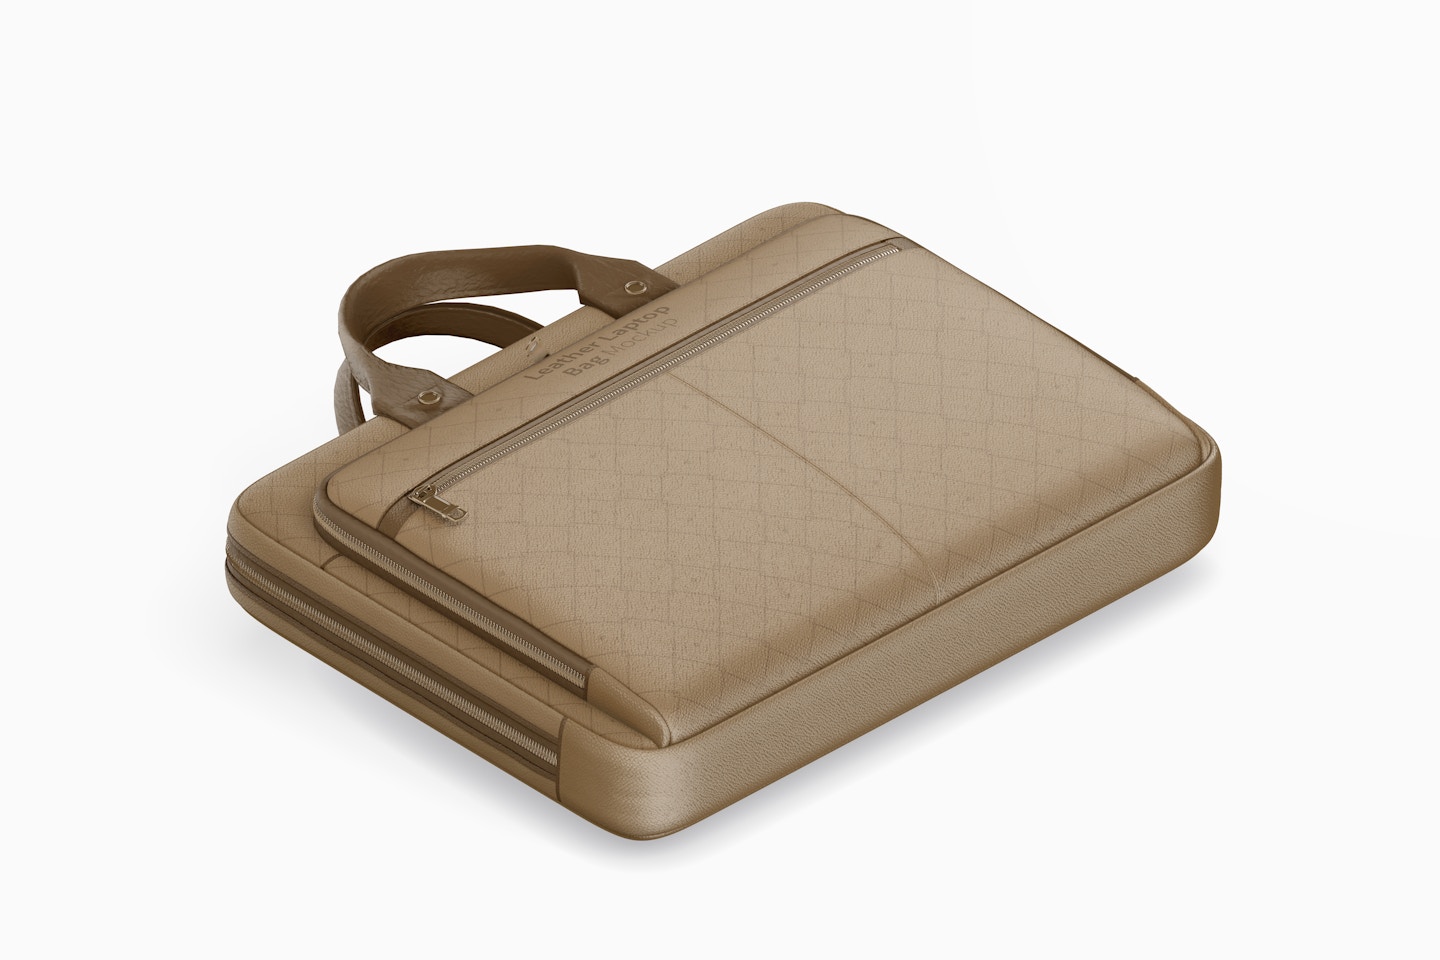 Leather Laptop Bag Mockup, Isometric Right View